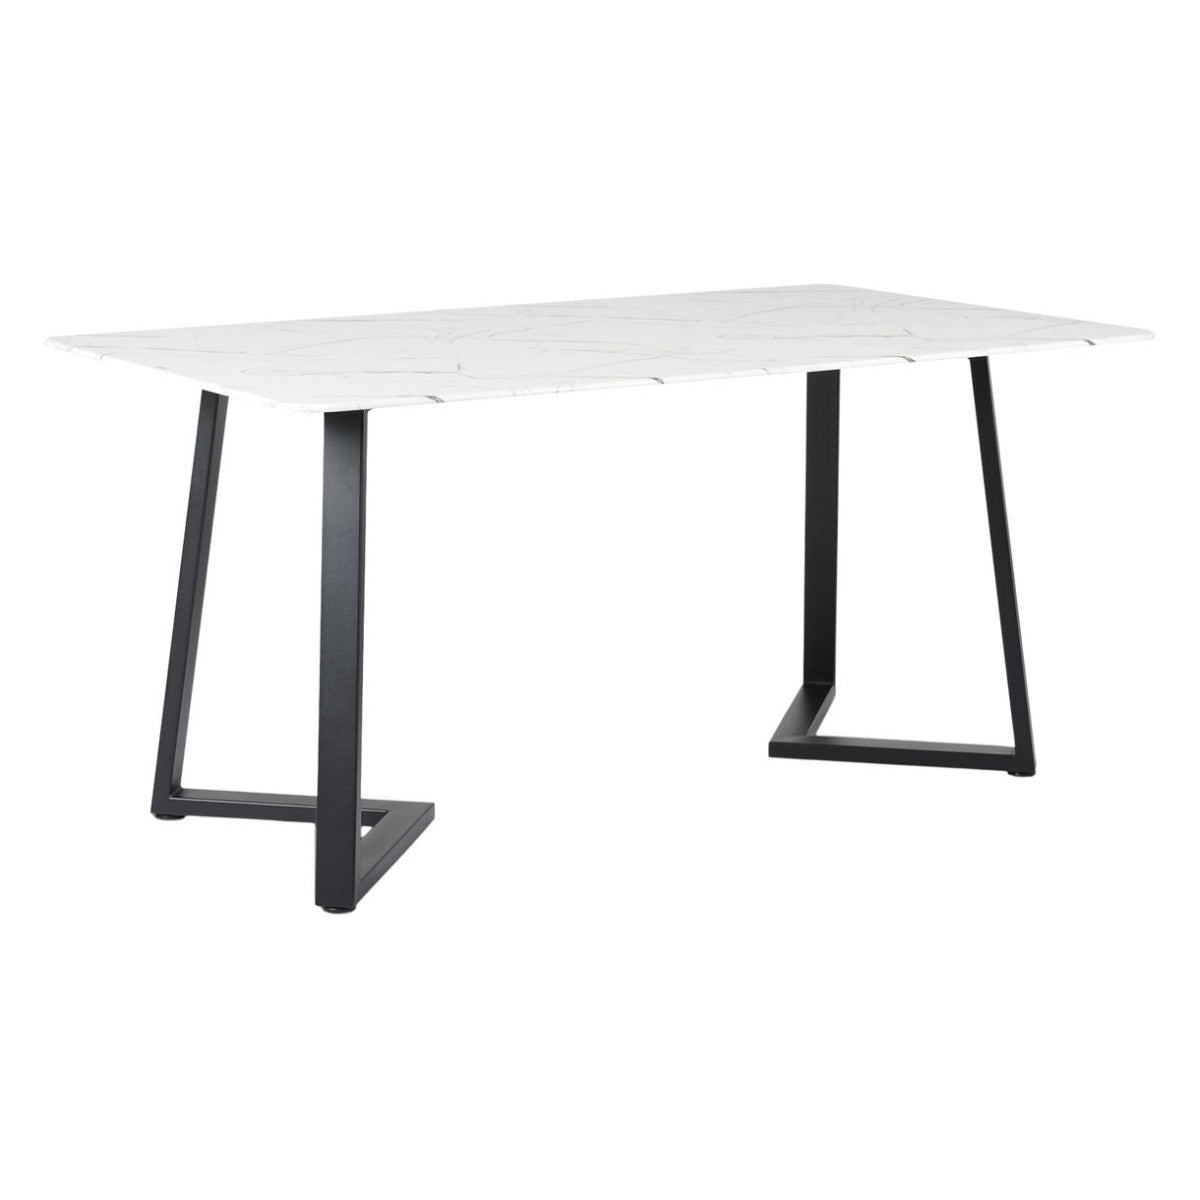 Fugura Marble 6 Seater Dining Table In Black Finish